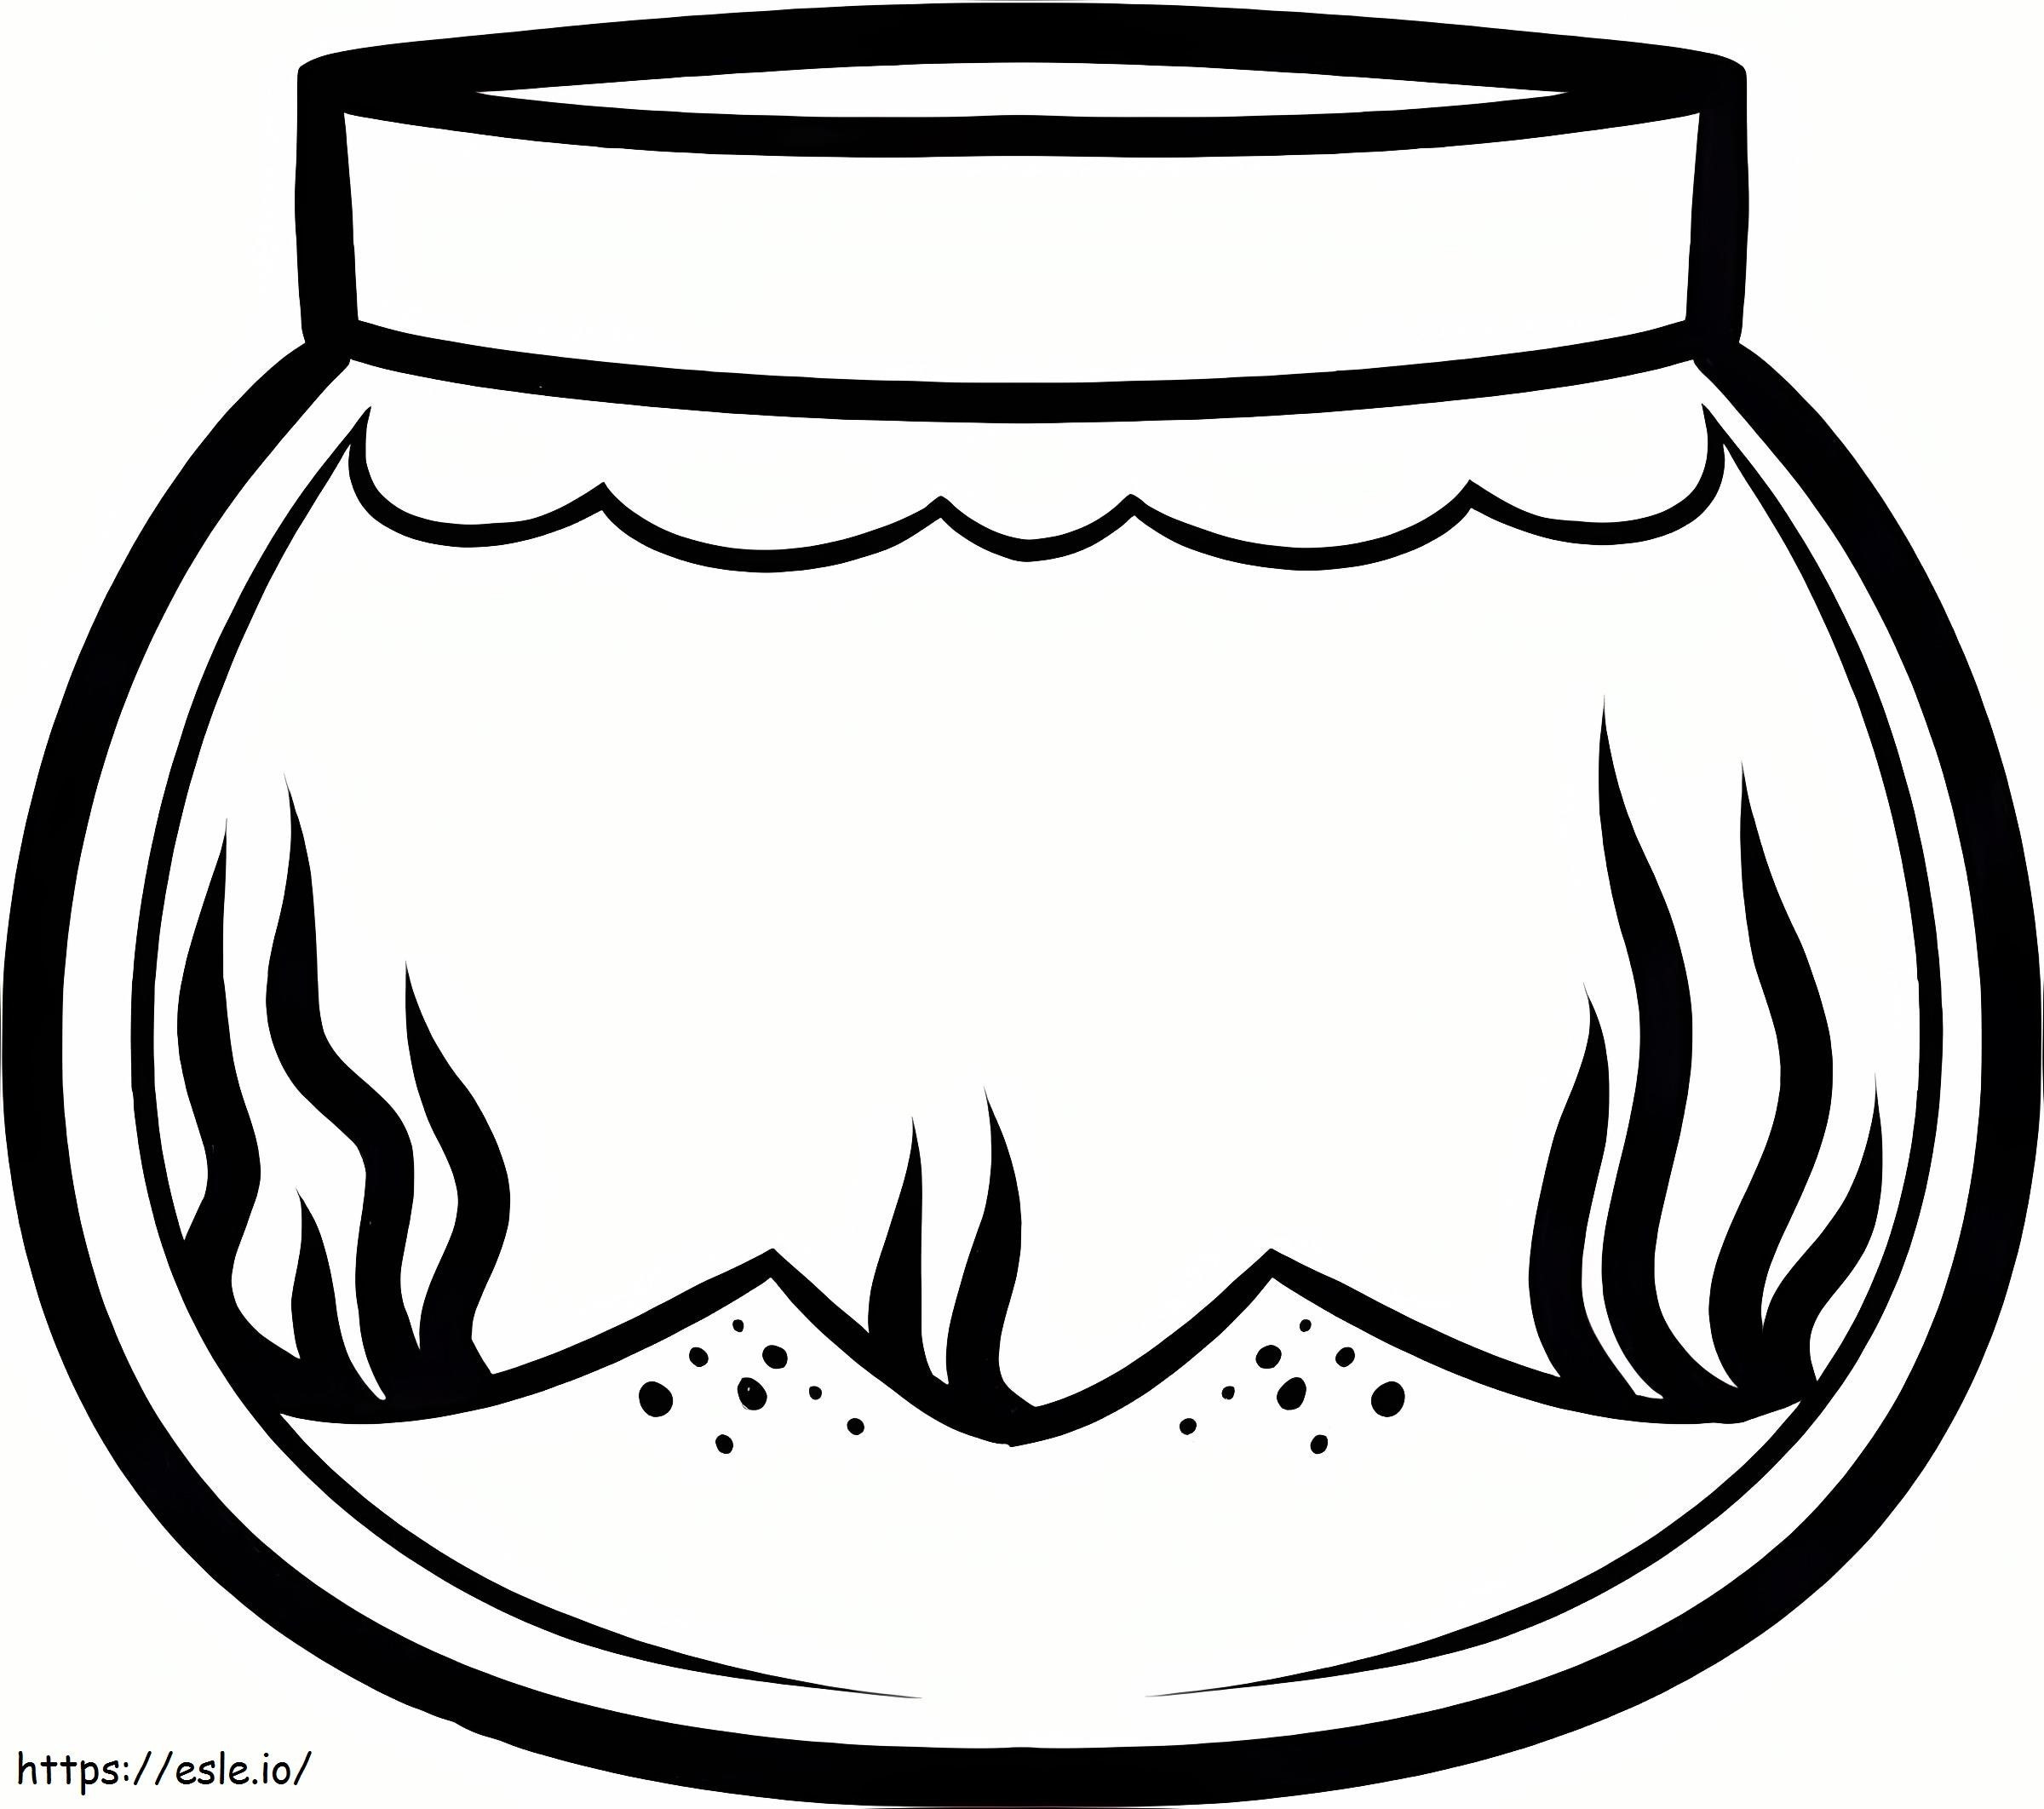 Empty Fish Bowl coloring page